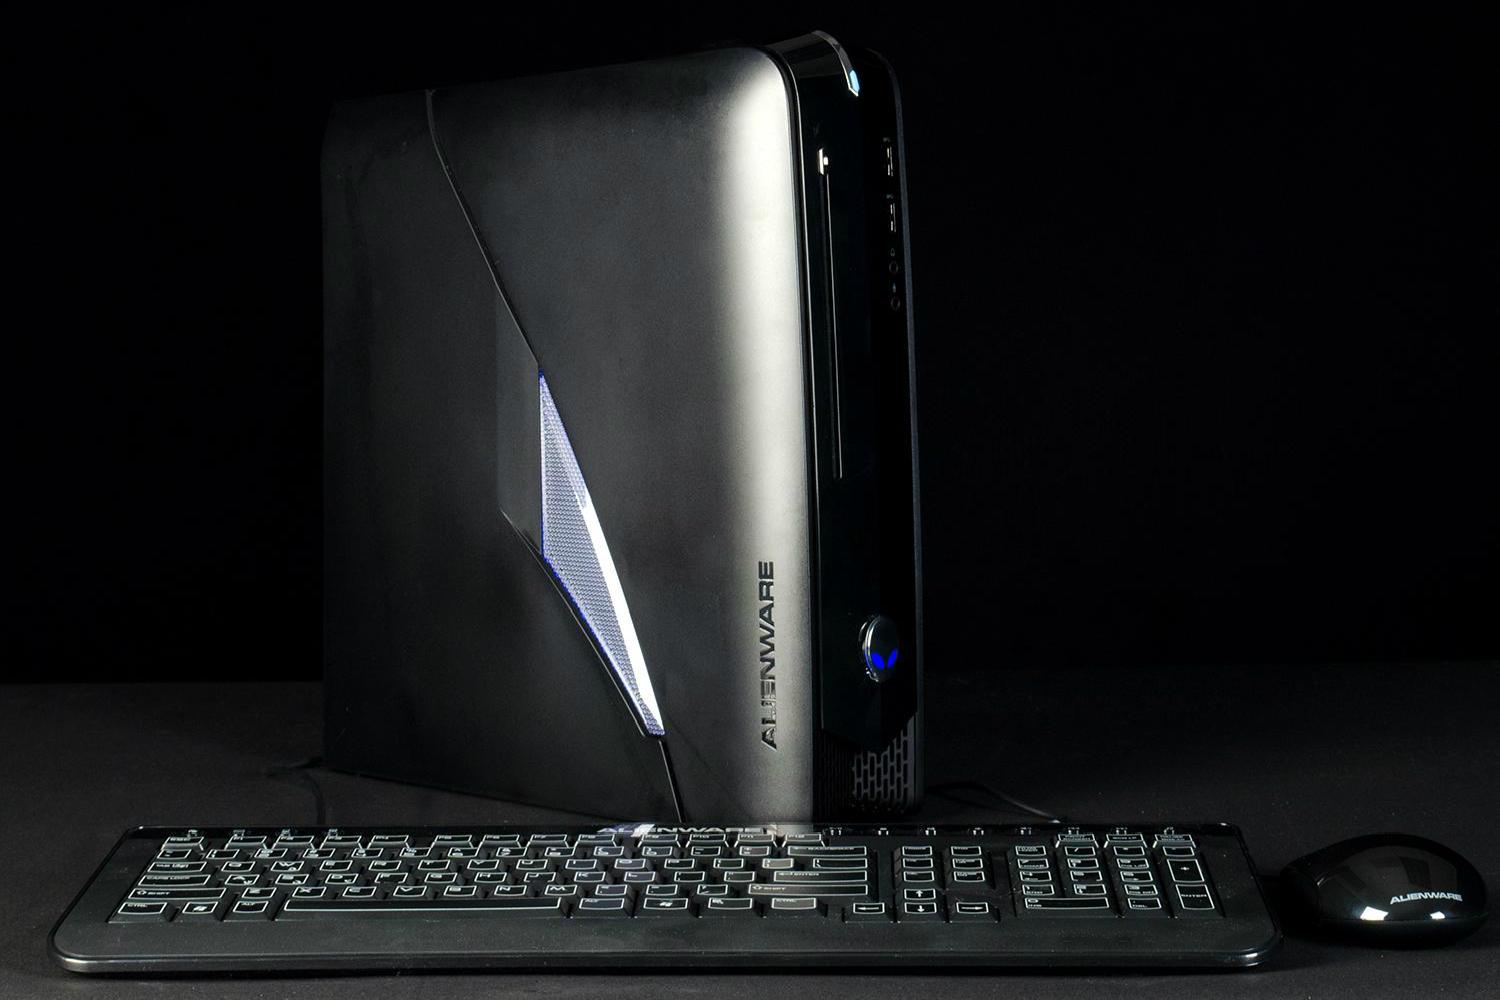 http://www.digitaltrends.com/wp-content/uploads/2013/11/Dell-Alienware-X51-Gaming-Desktop-review-tower-and-keyboard.jpg